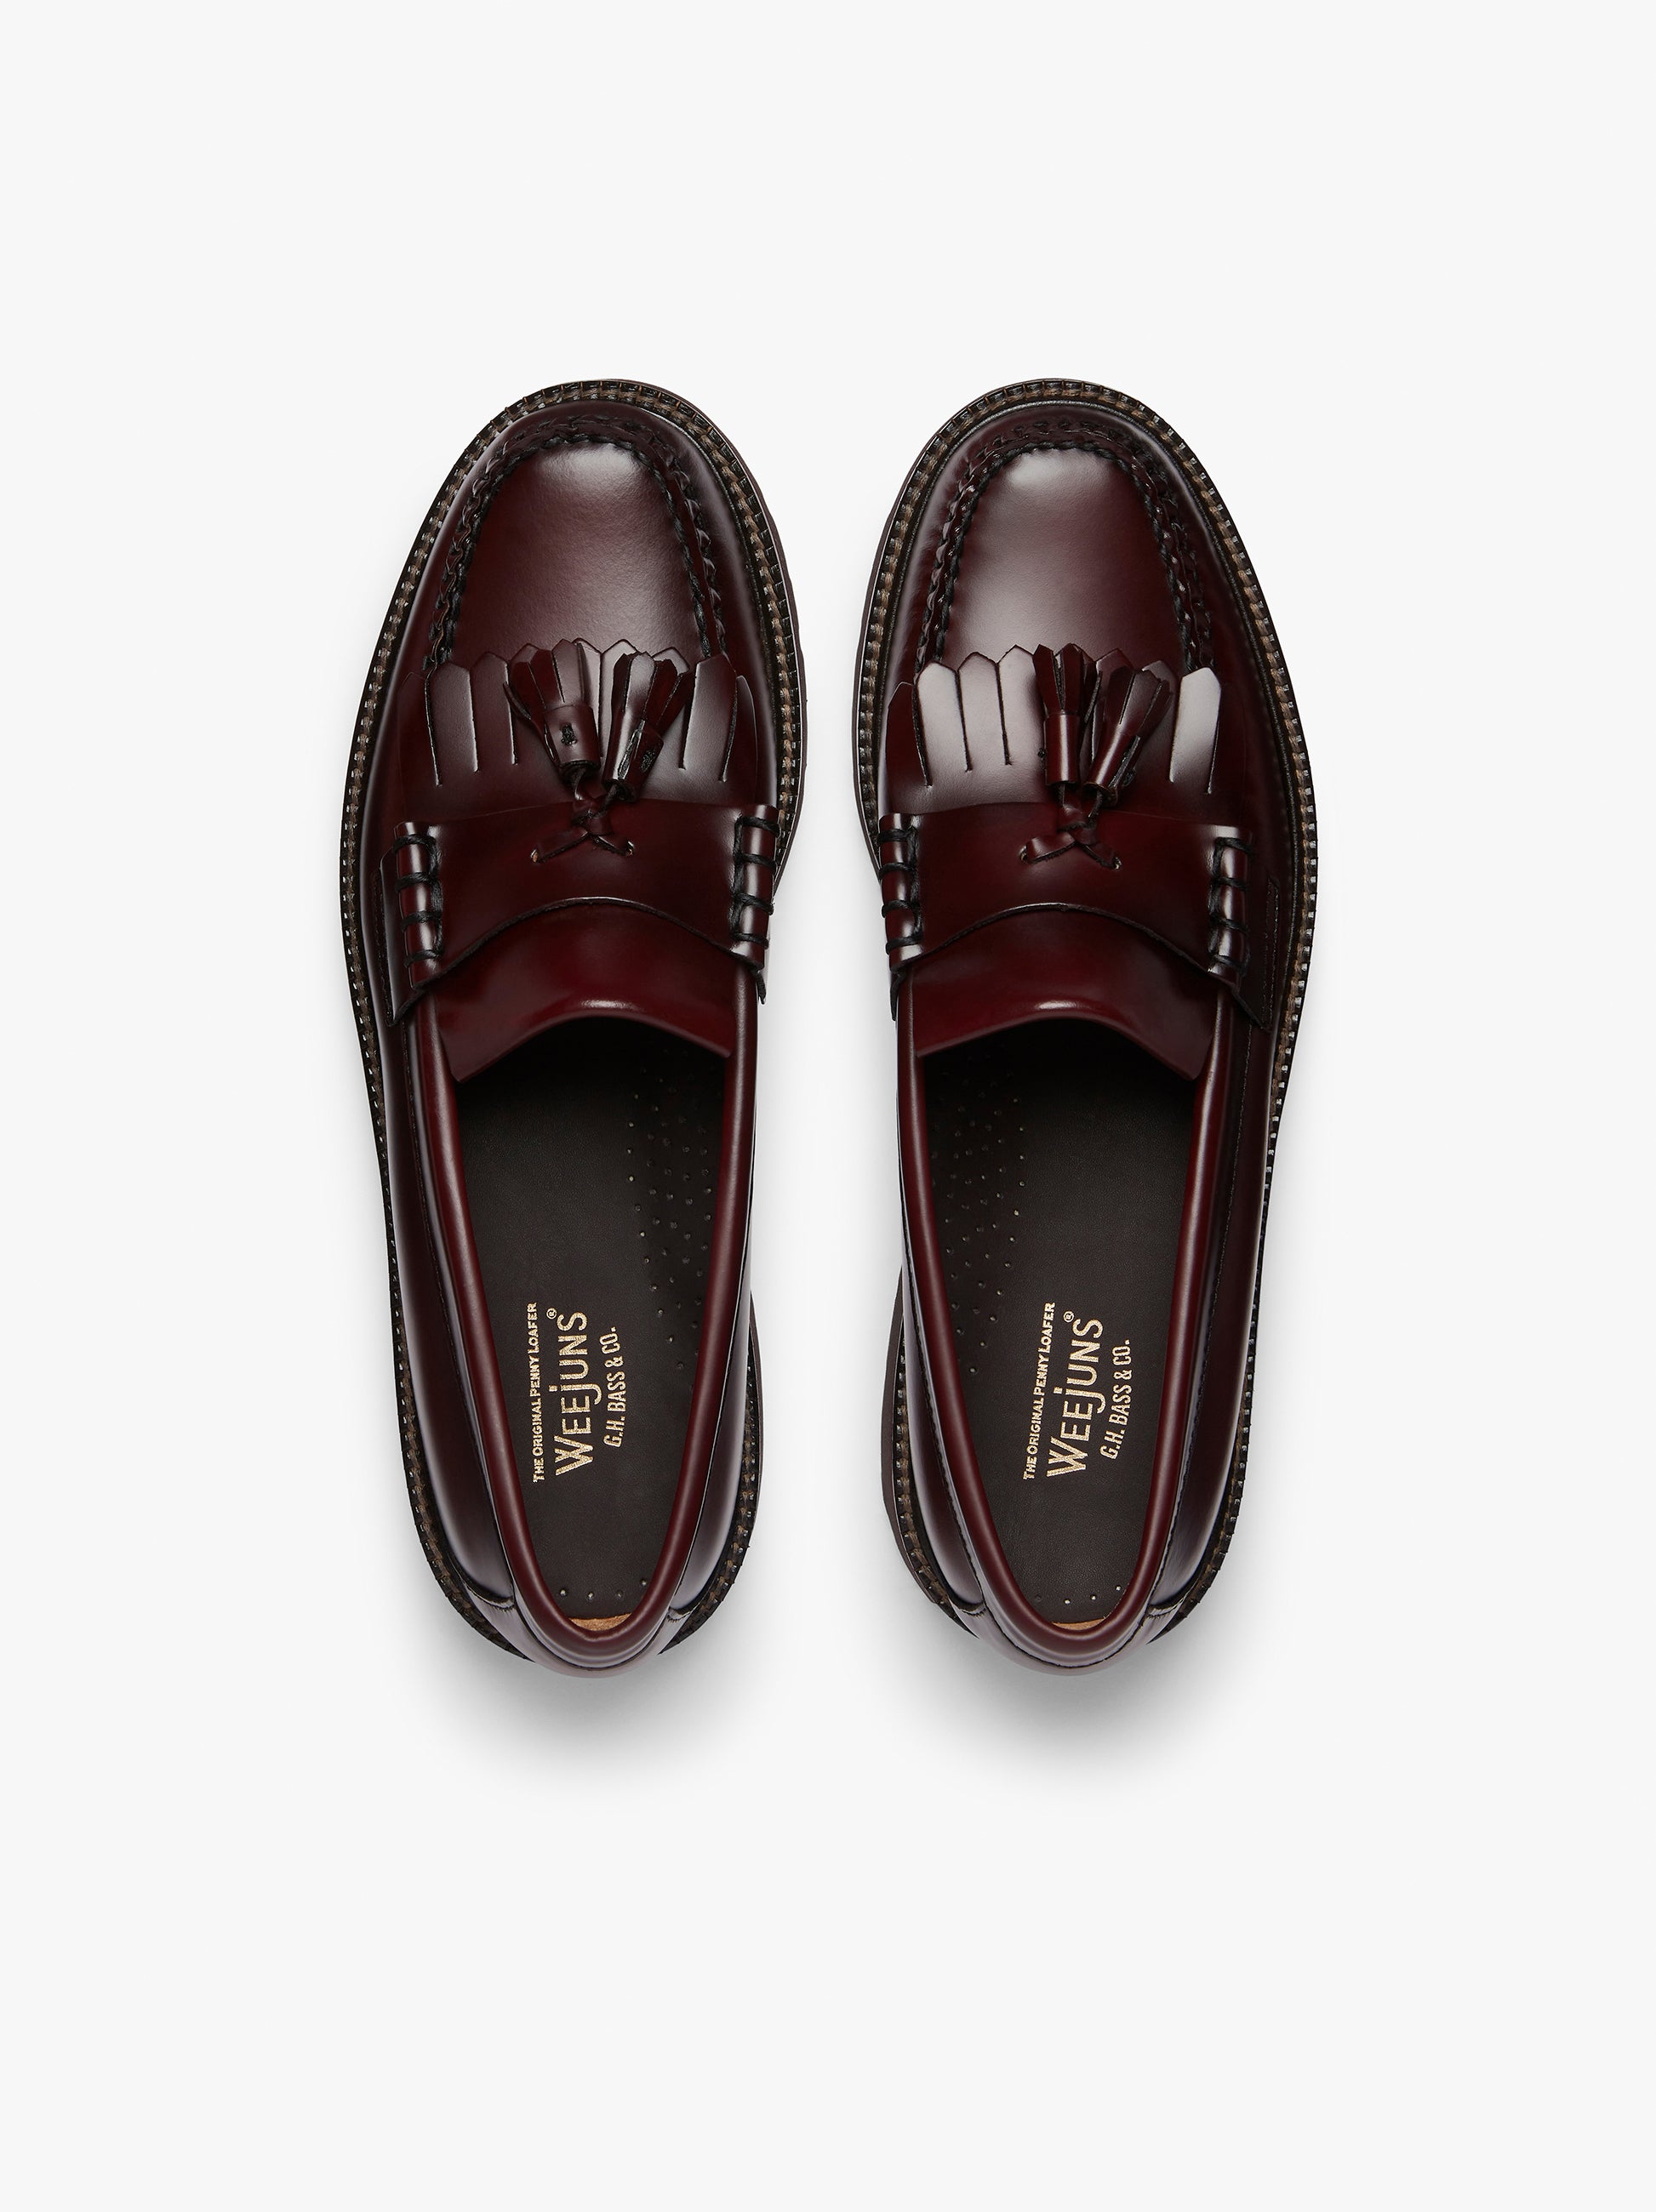 Kiltie Tassel Loafer Mens | Wine Leather Loafers – G.H.BASS – G.H.